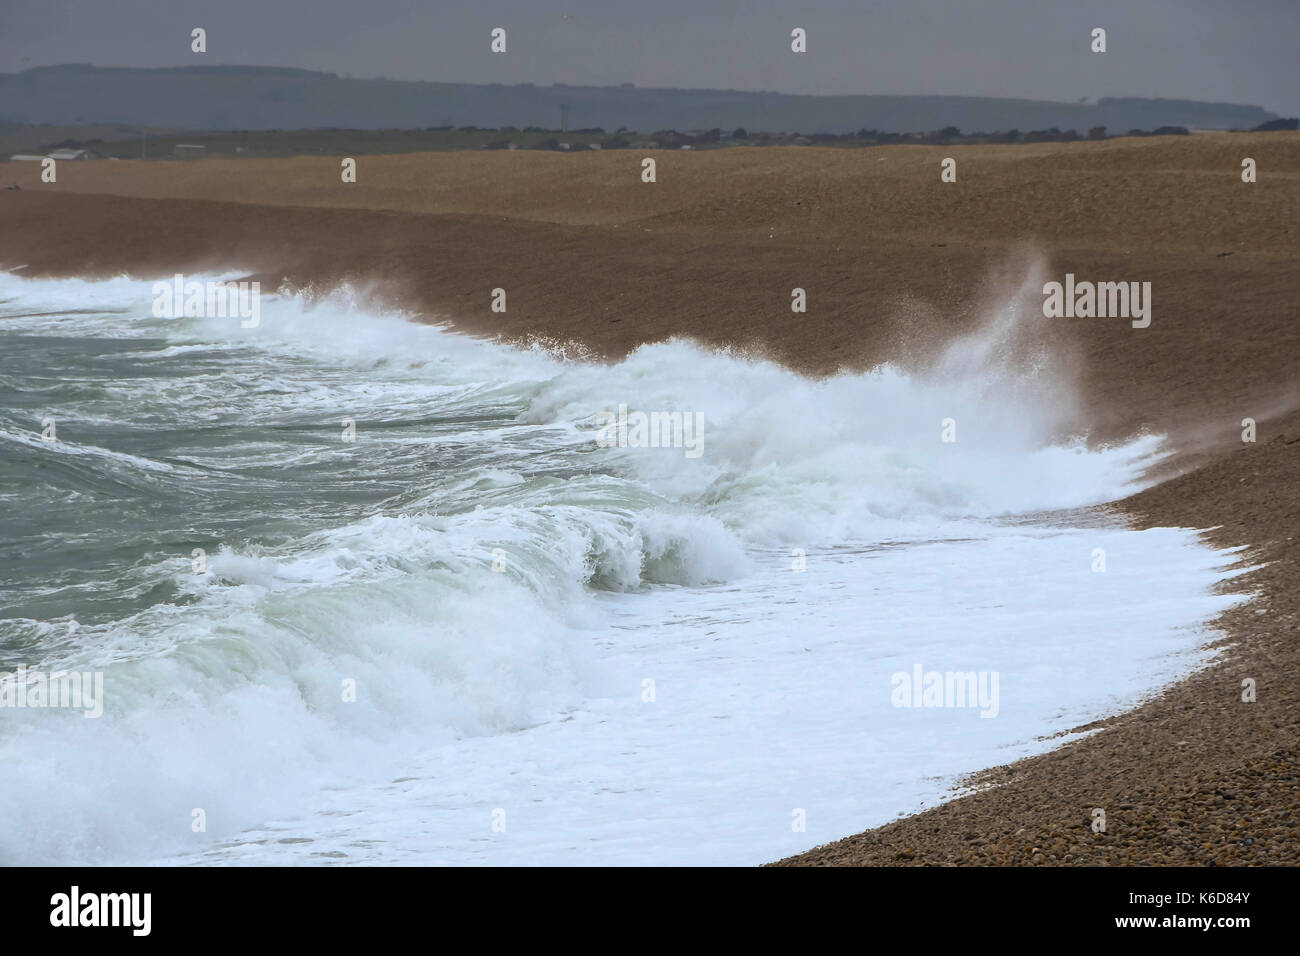 Portland, Dorset, UK. 12th Sep, 2017. UK Weather. Rough seas crash ashore at Chesil Cove at Chiswell on the Isle of Portland in Dorset as strong winds build ahead of a stormy night with predicted gusts over 50mph. Photo Credit: Graham Hunt/Alamy Live News Stock Photo